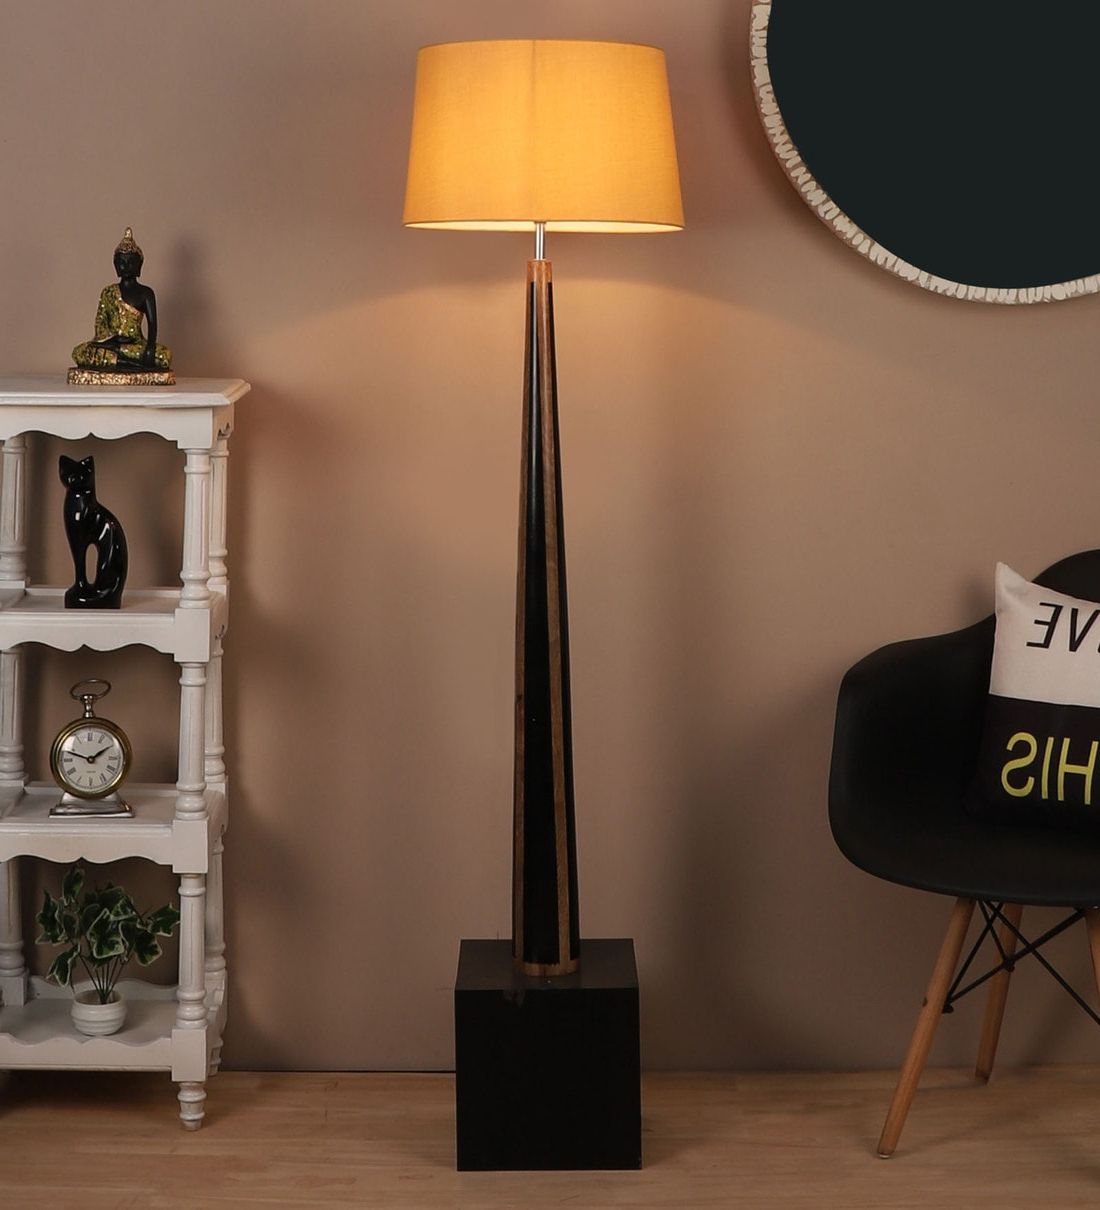 Buy Gold Shade Floor Lamp With Mango Wood Basethe Lighting Hub Online –  Club Floor Lamps – Floor Lamps – Lamps And Lighting – Pepperfry Product Within Trendy Mango Wood Floor Lamps (View 14 of 15)